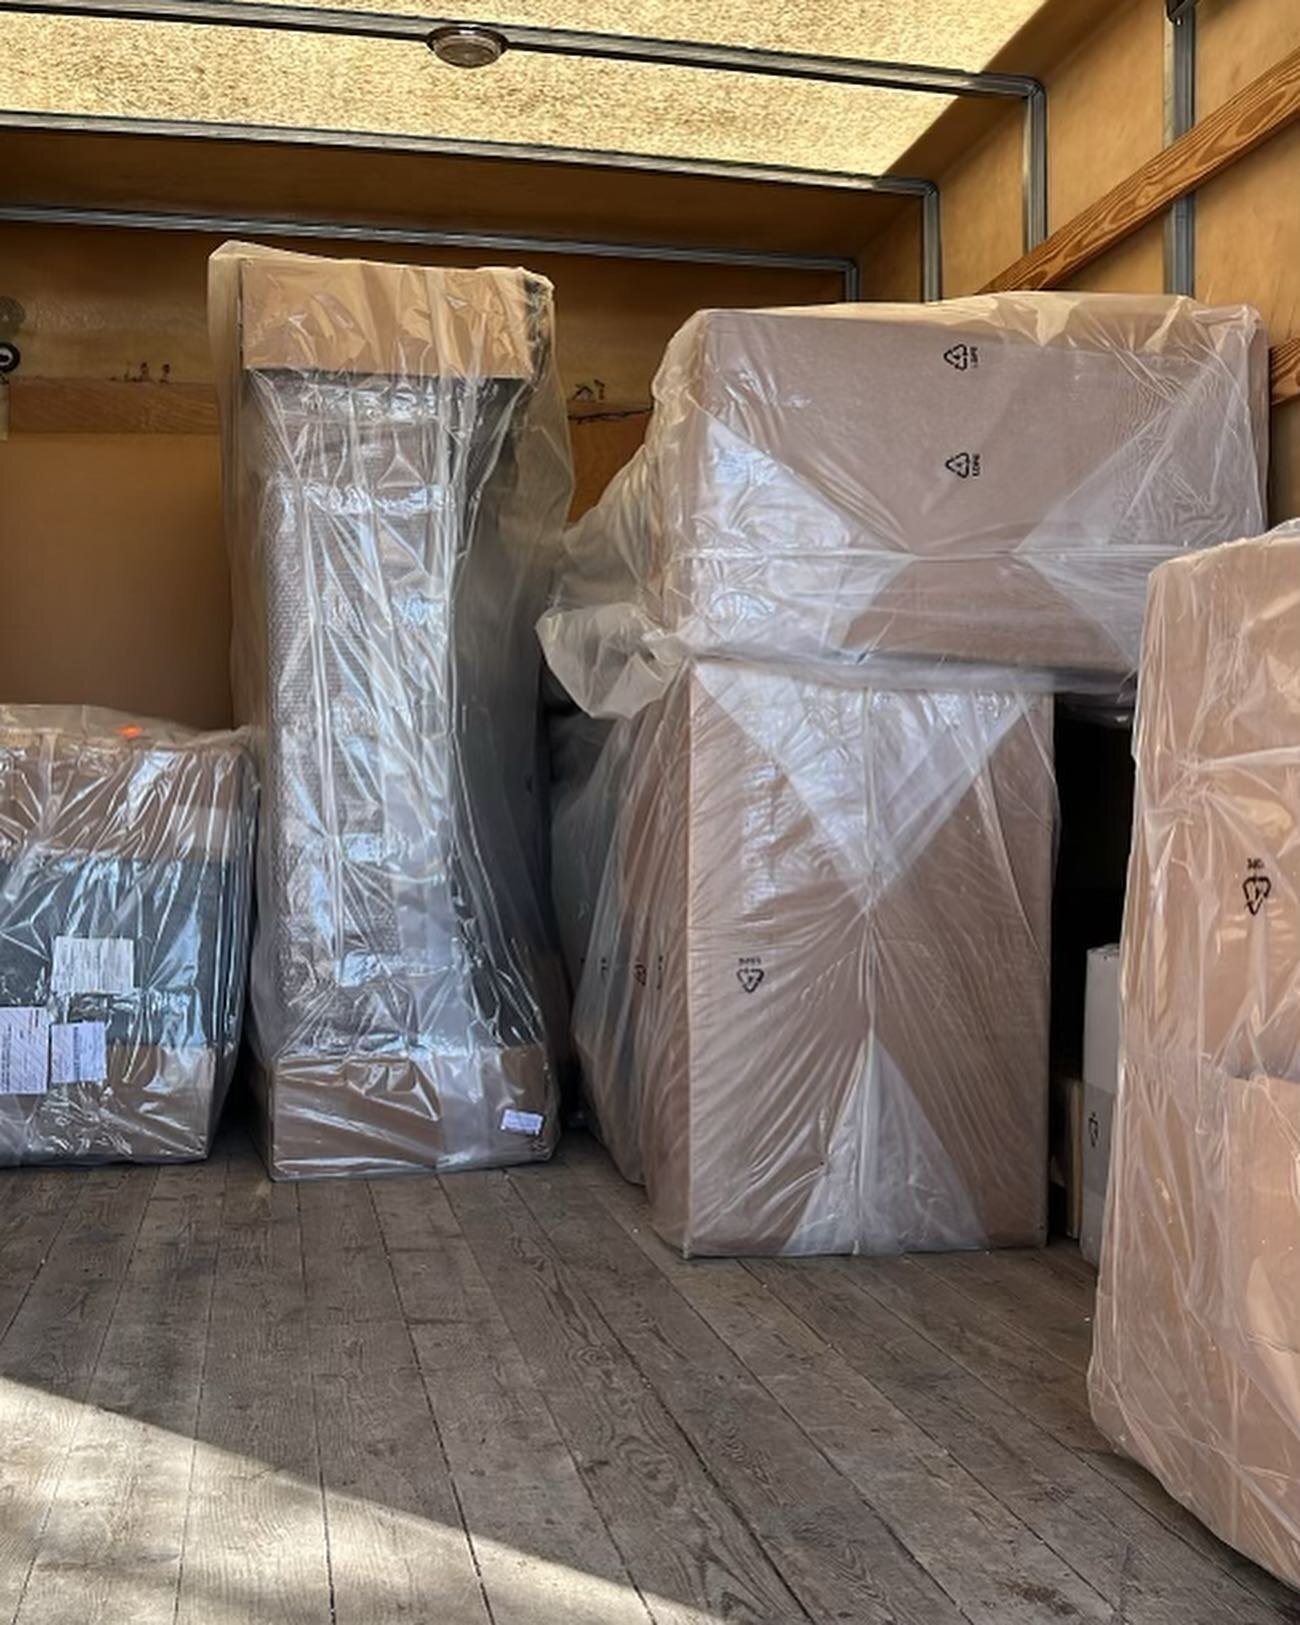 Big Furniture Delivery for @eq3 today! 🚛📦

We're proud to have partnered with @eq3 to handle their latest big delivery! Our team of experienced movers ensured that every item was transported safely and efficiently.

But we don't just deliver for bi